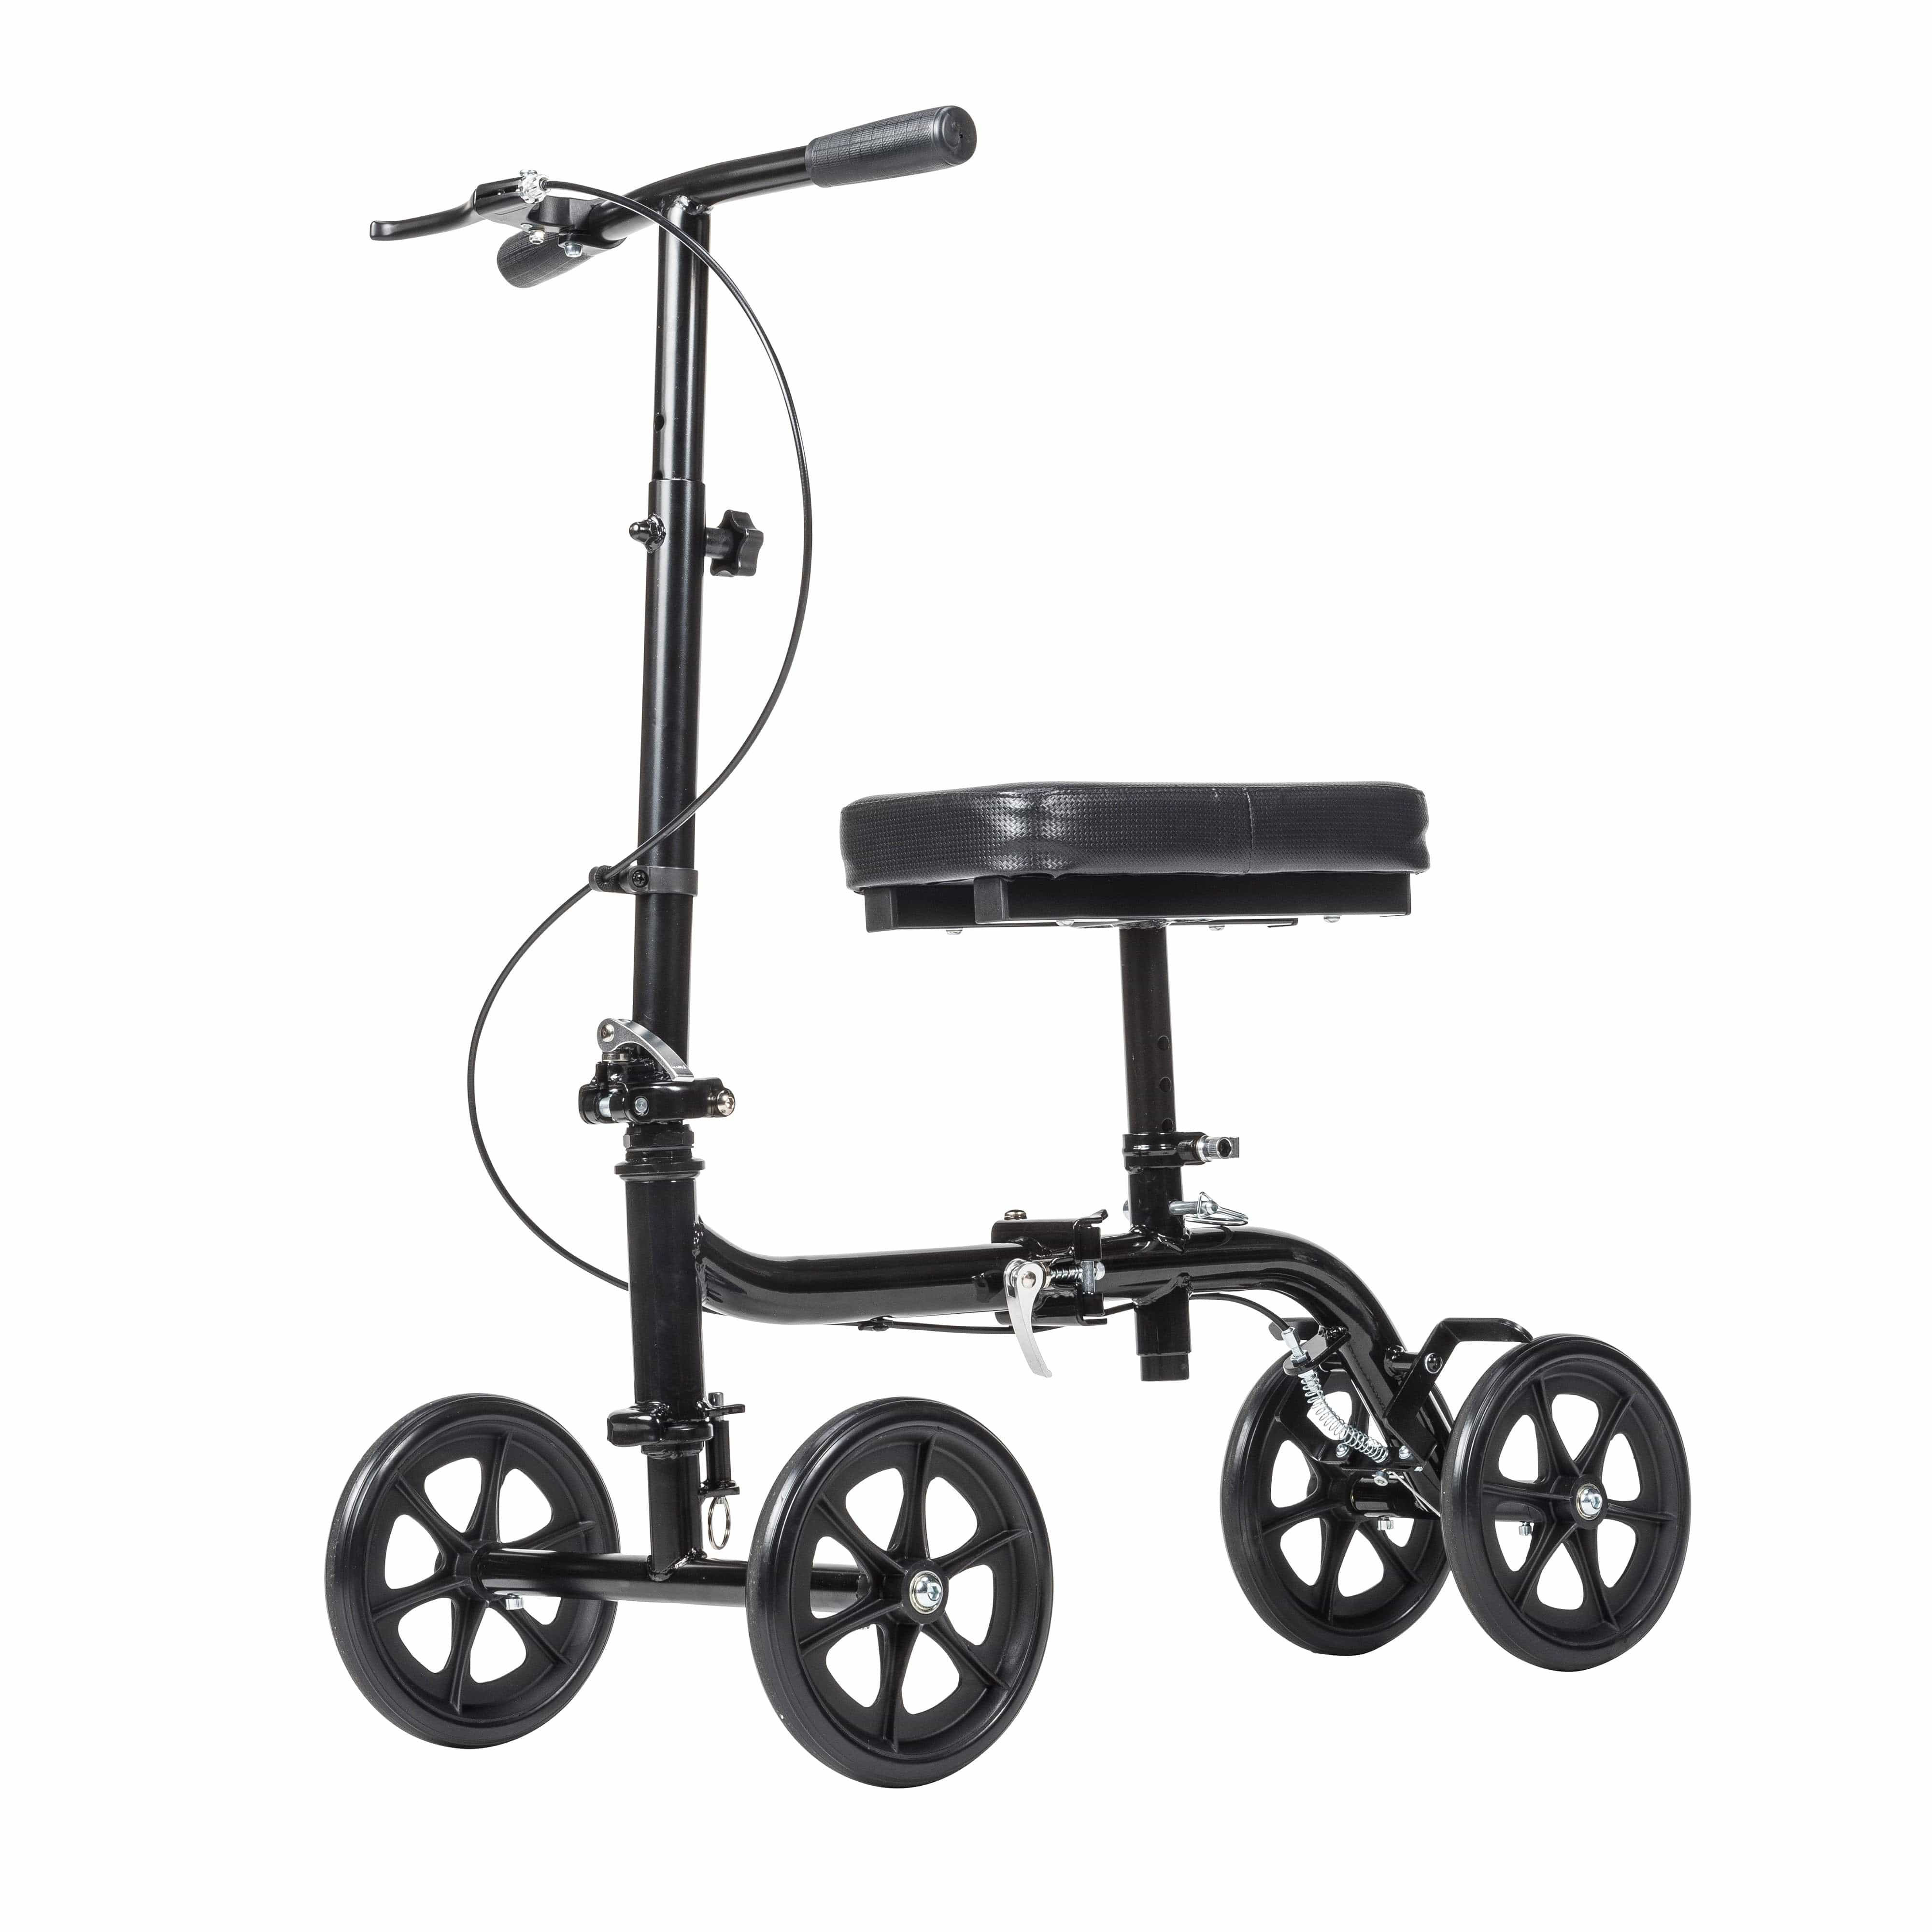 Drive Medical Drive Medical Steerable Folding Knee Walker Knee Scooter, Alternative to Crutches rtl799